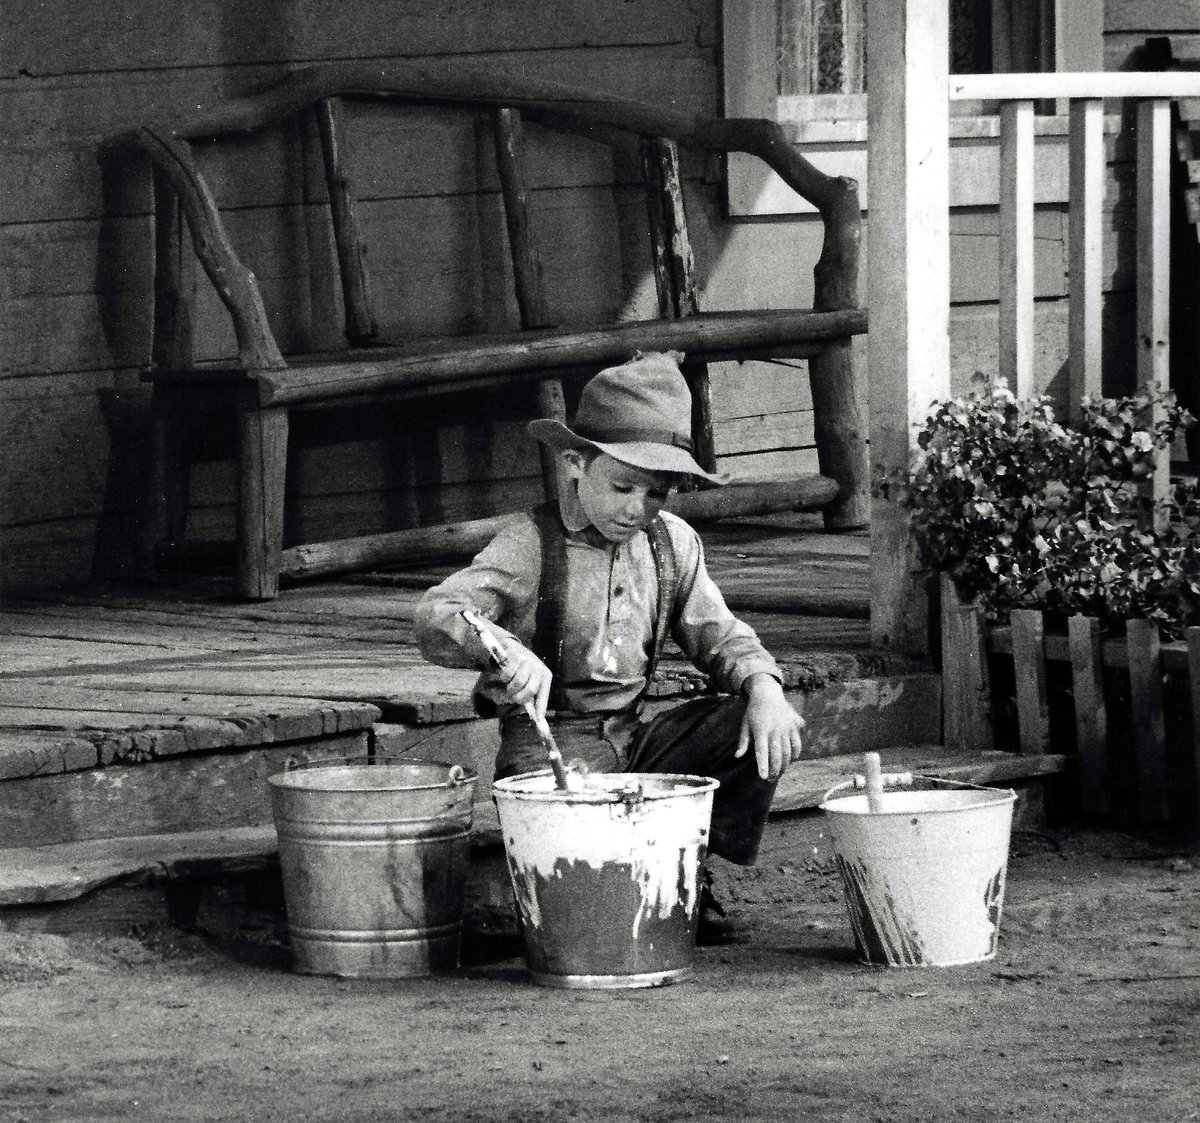 Just mixin’ up a little whitewash on the set of #Gunsmoke, 1972. ##seventiestelevision